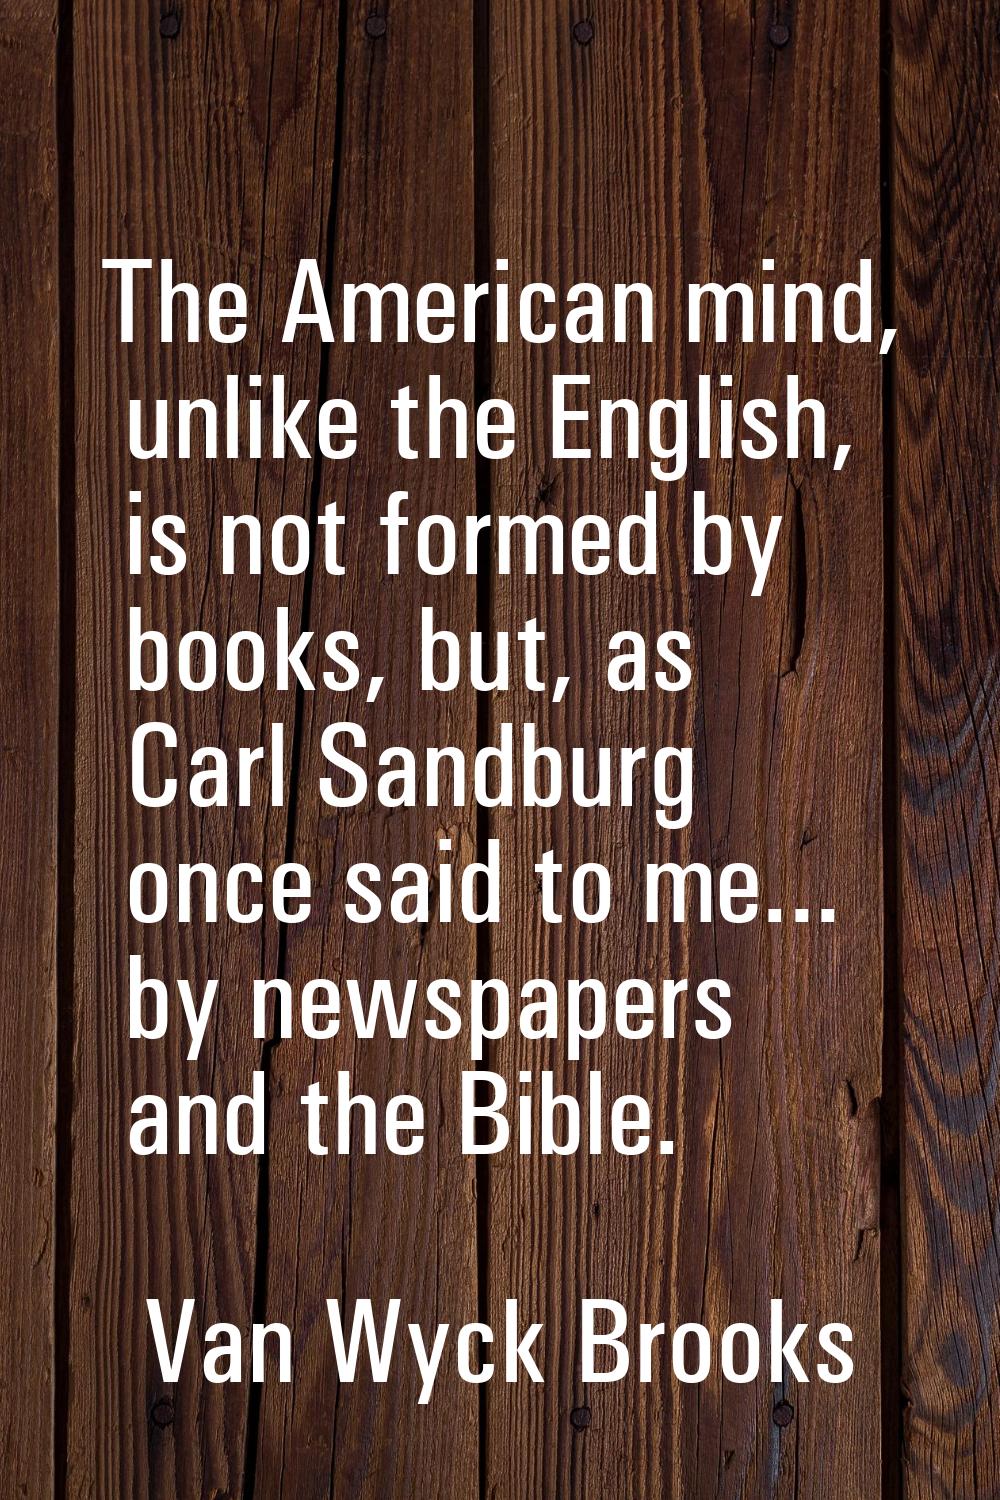 The American mind, unlike the English, is not formed by books, but, as Carl Sandburg once said to m